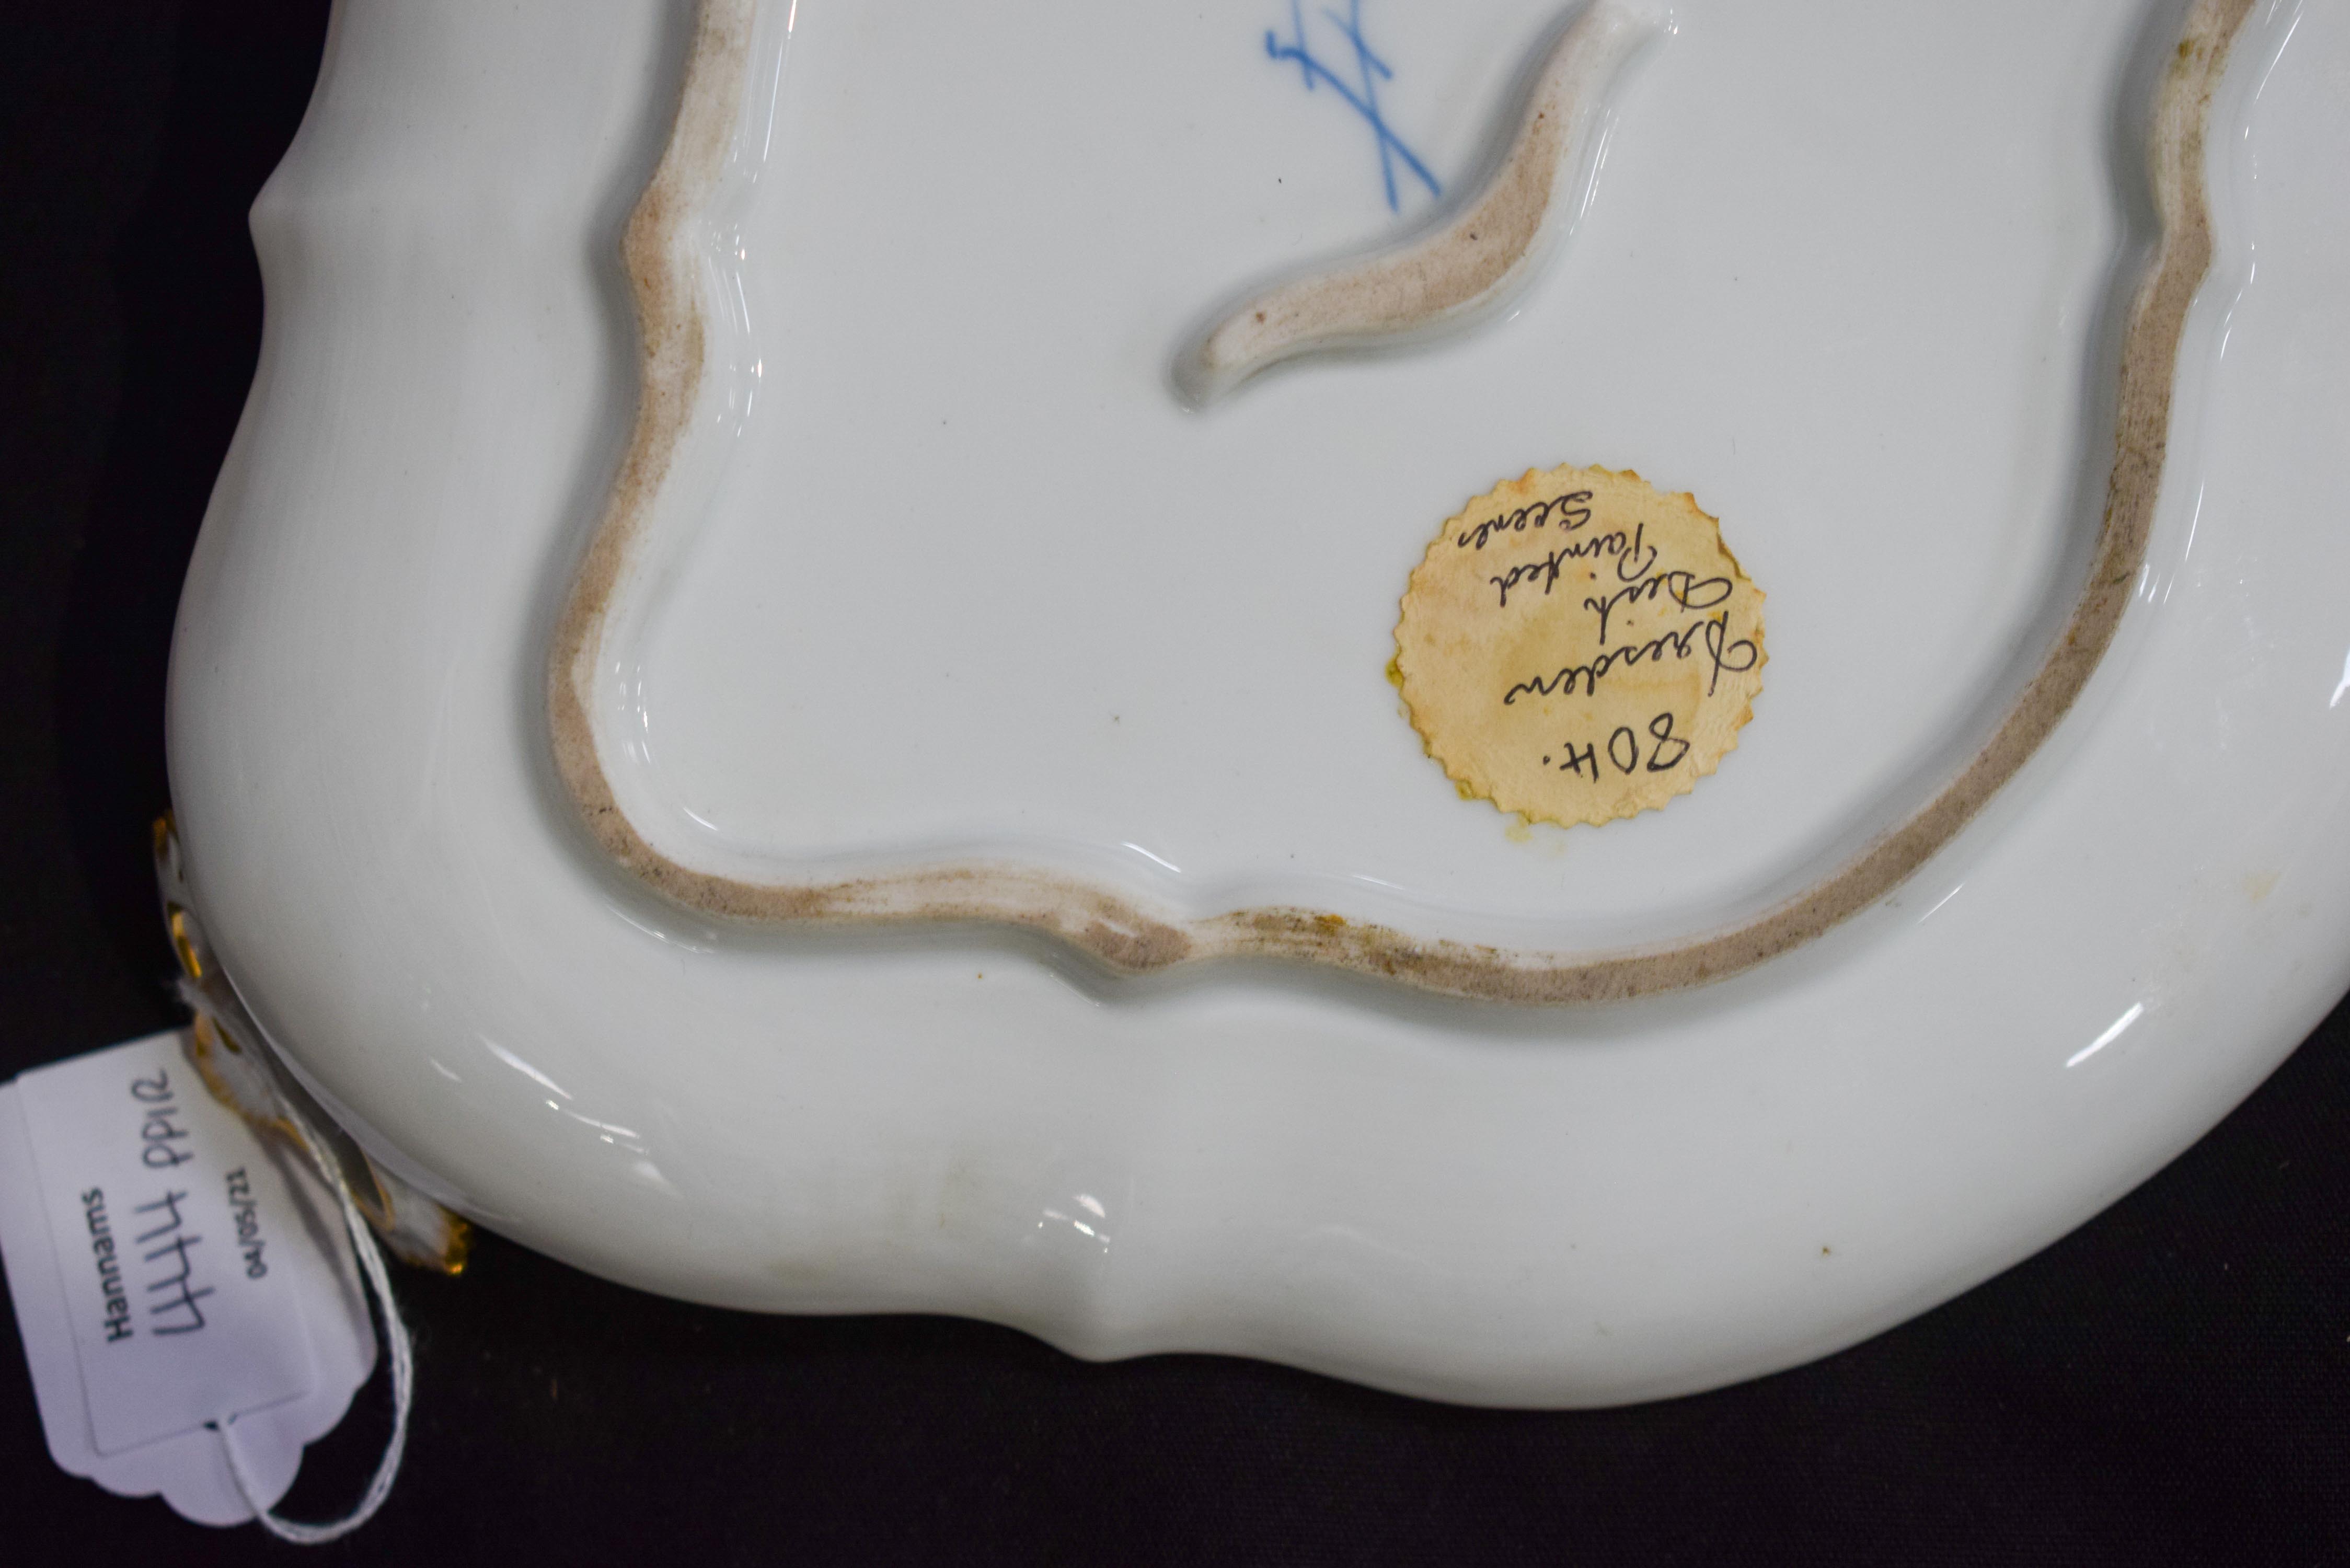 A FINE PAIR OF 18TH/19TH CENTURY MEISSEN TWIN HANDLED PORCELAIN DISHES painted with coastal views. 2 - Image 19 of 19